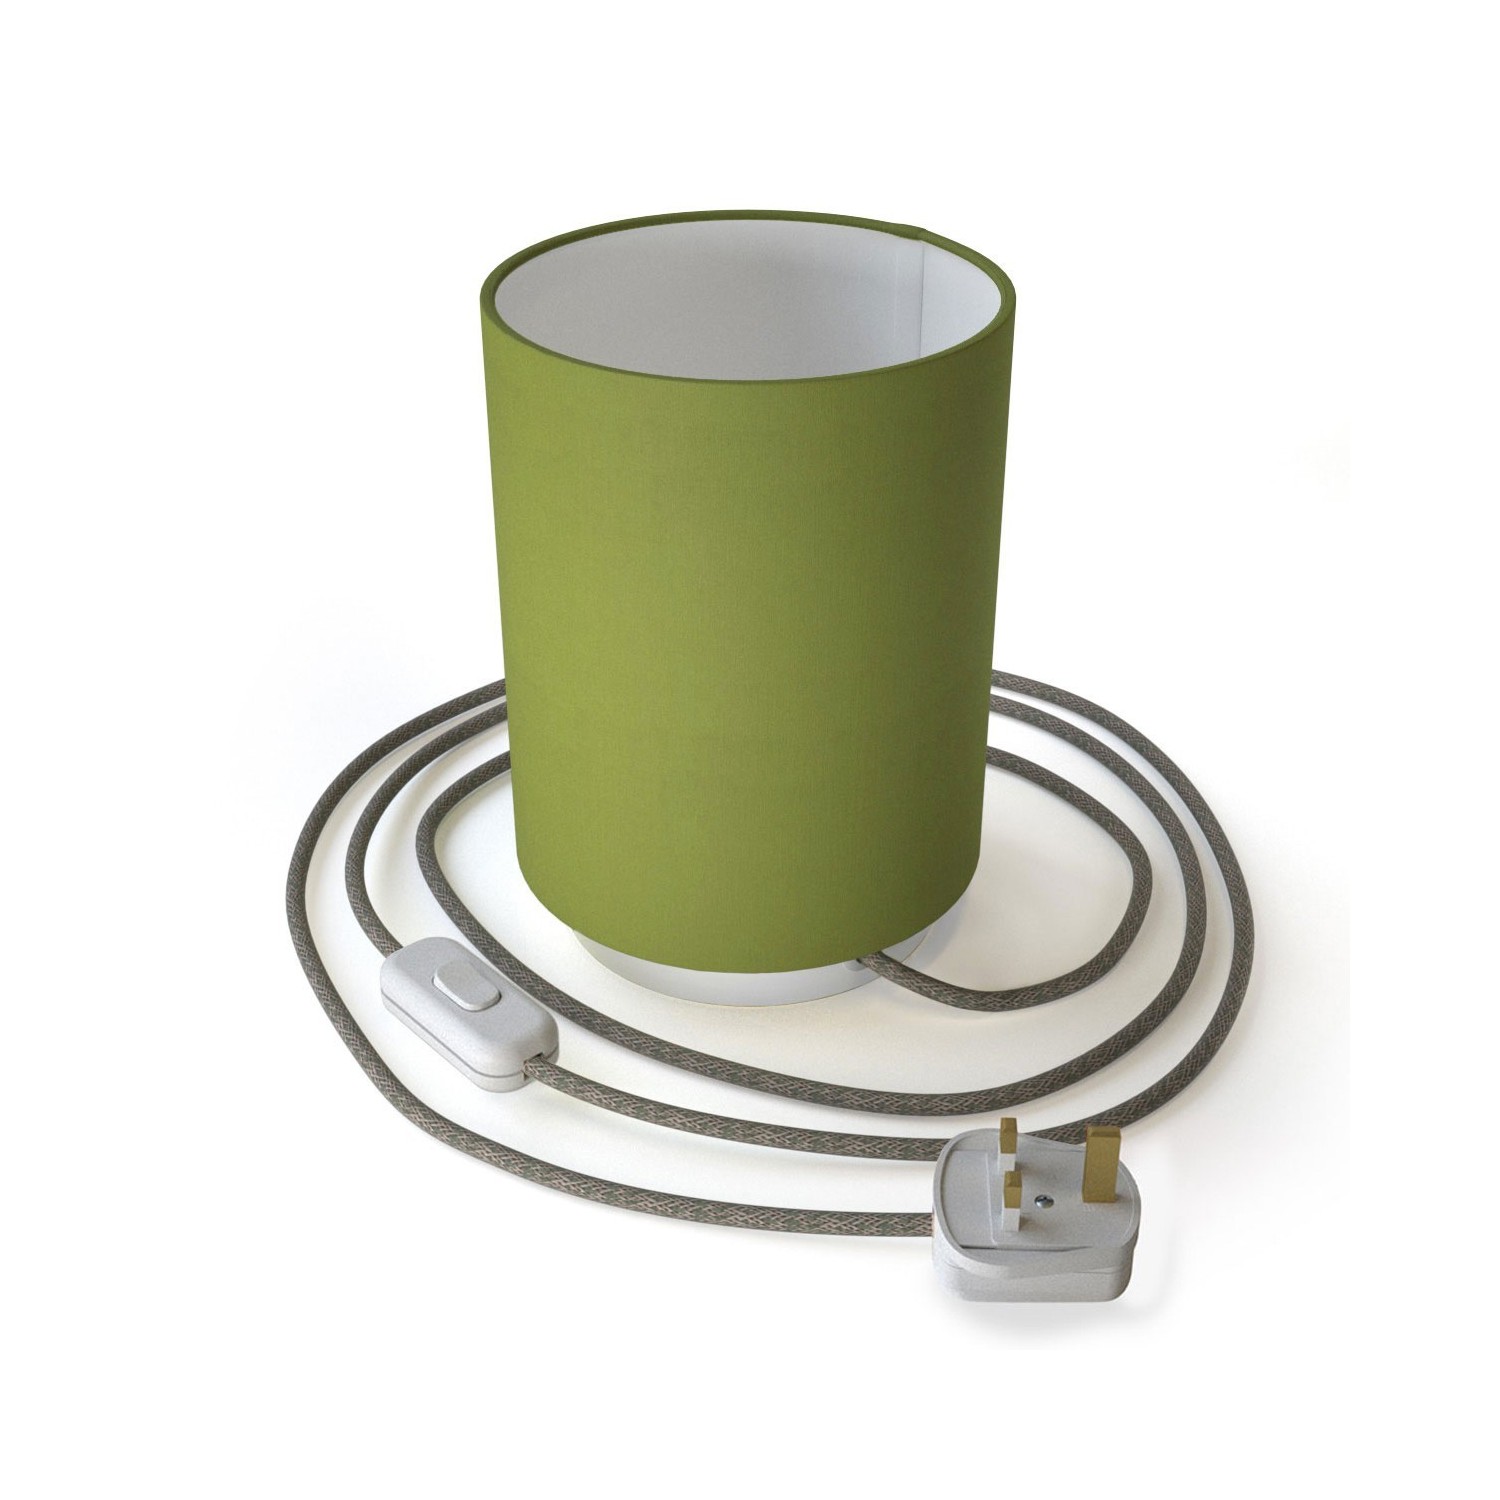 Posaluce in metal with Olive Green Canvas Cilindro lampshade, complete with fabric cable, switch and UK plug